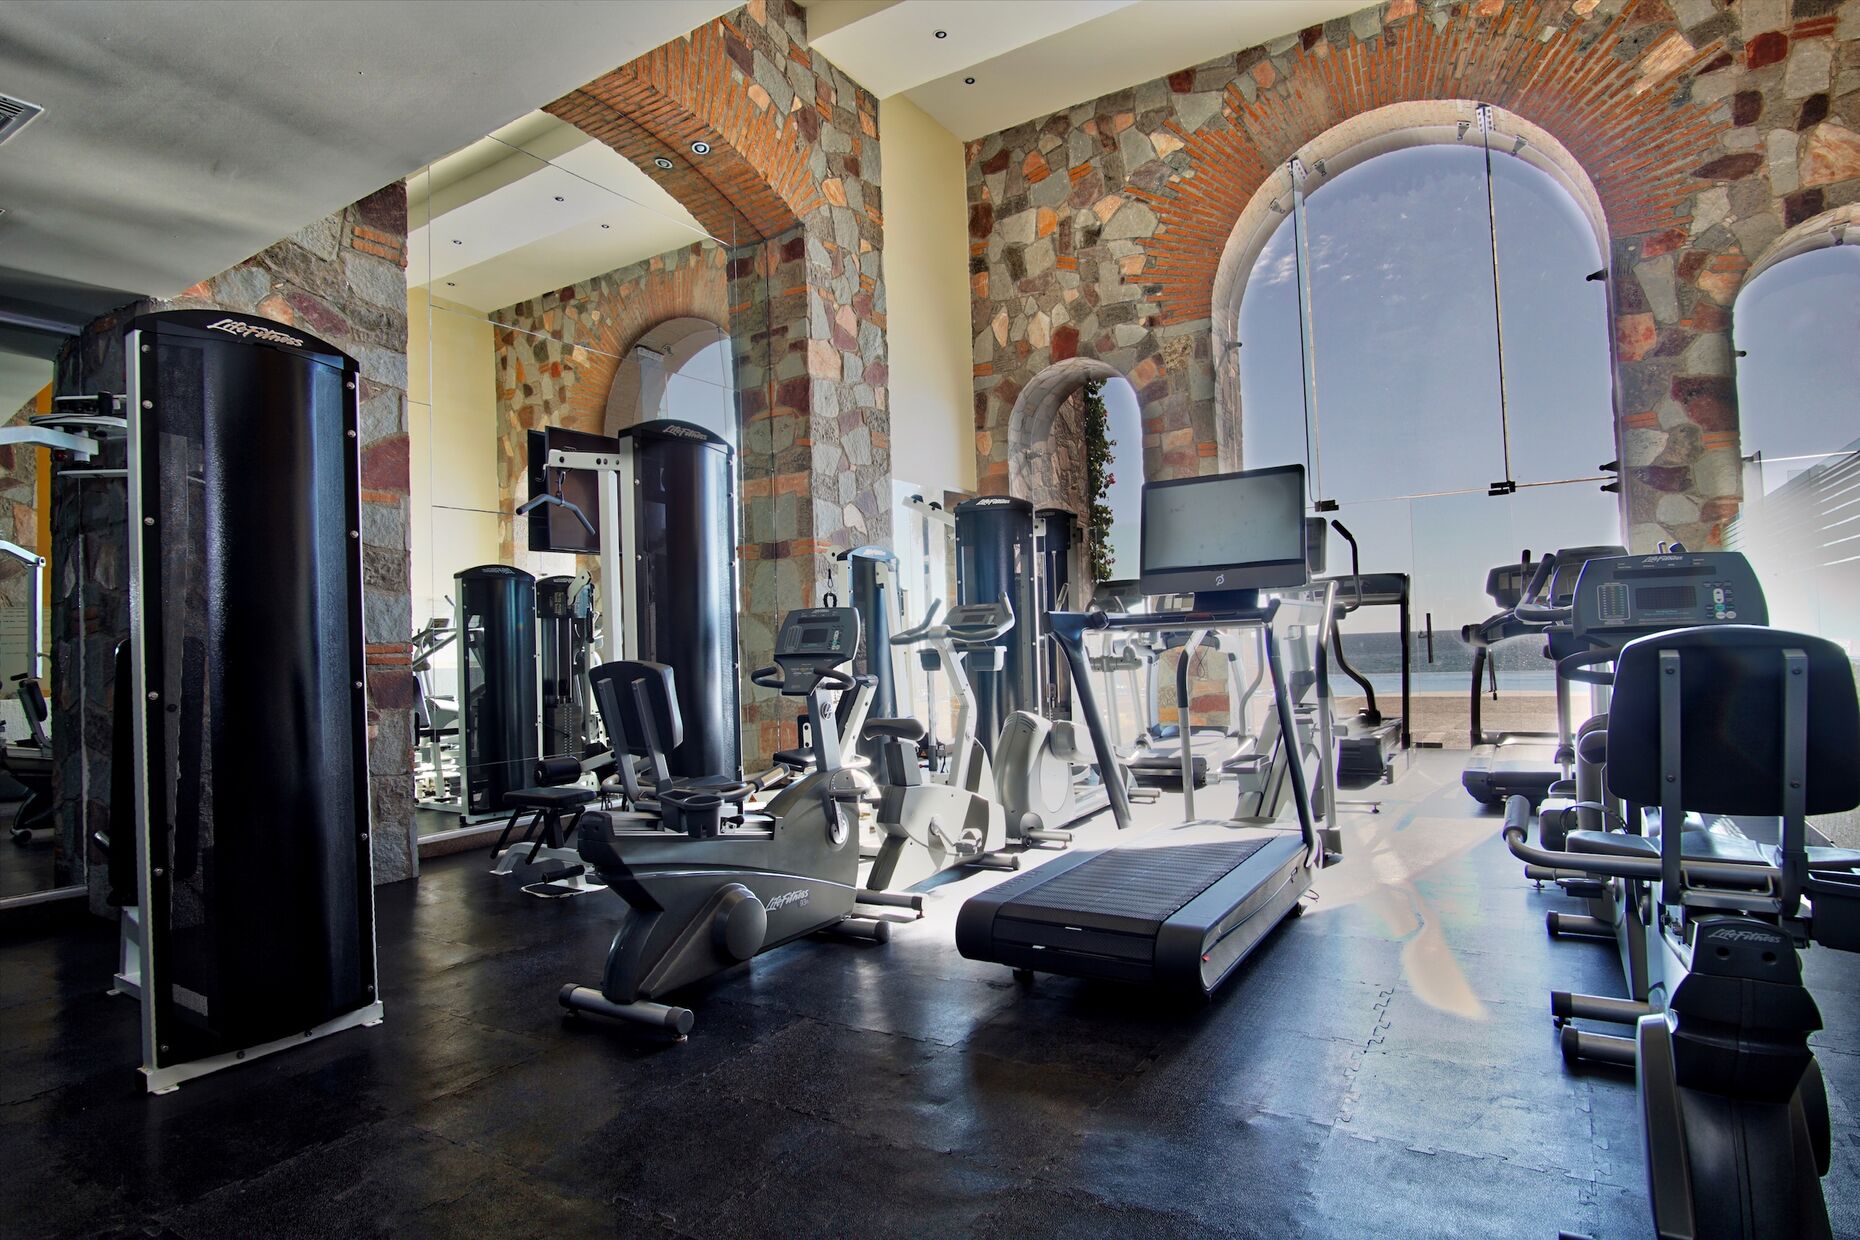 Stately gym with many aerobic machines, along with free weights and Nautilus eqiuipment.